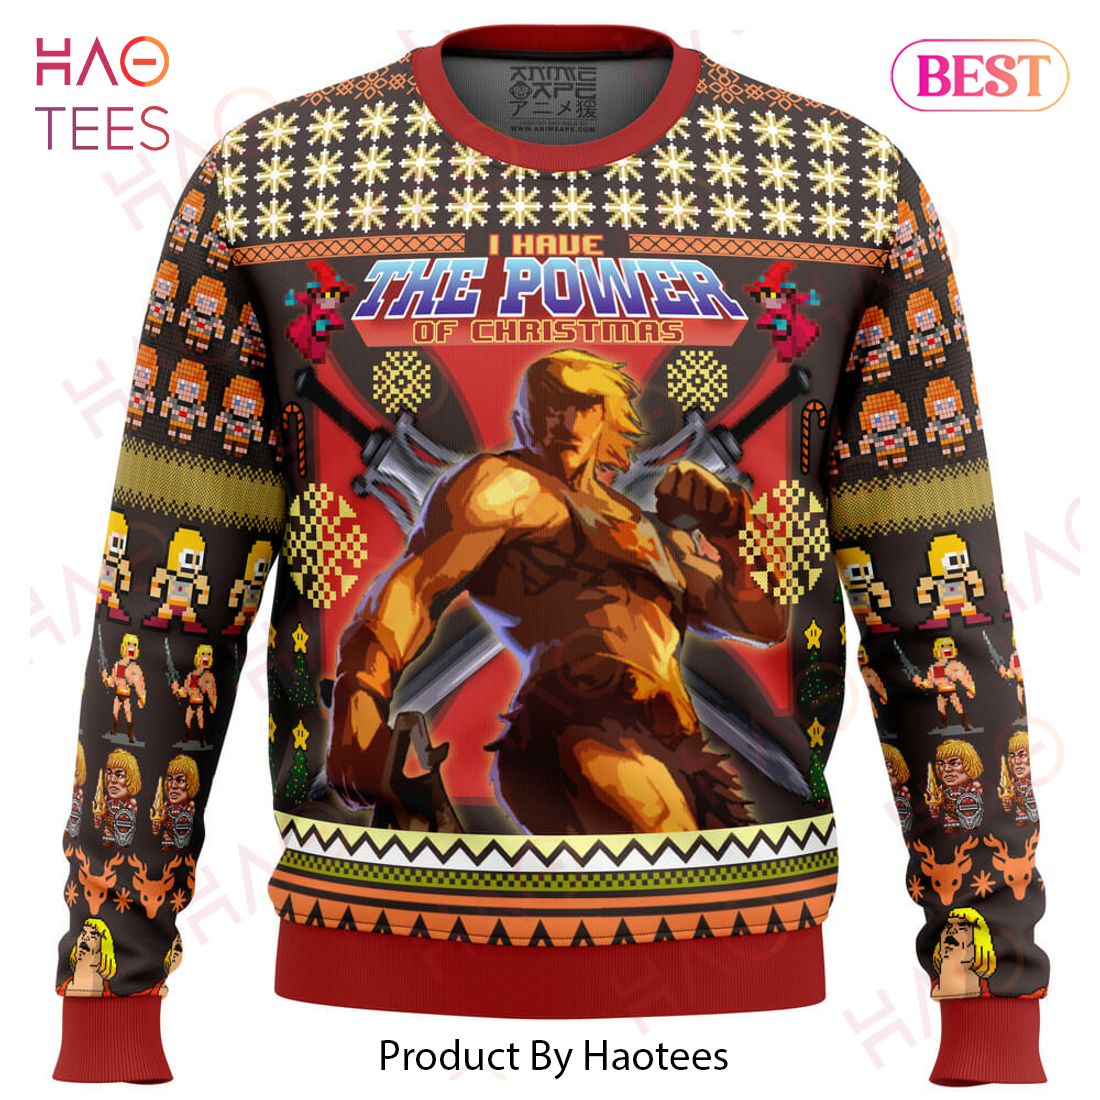 He-Man Masters of the Universe Ugly Christmas Sweater